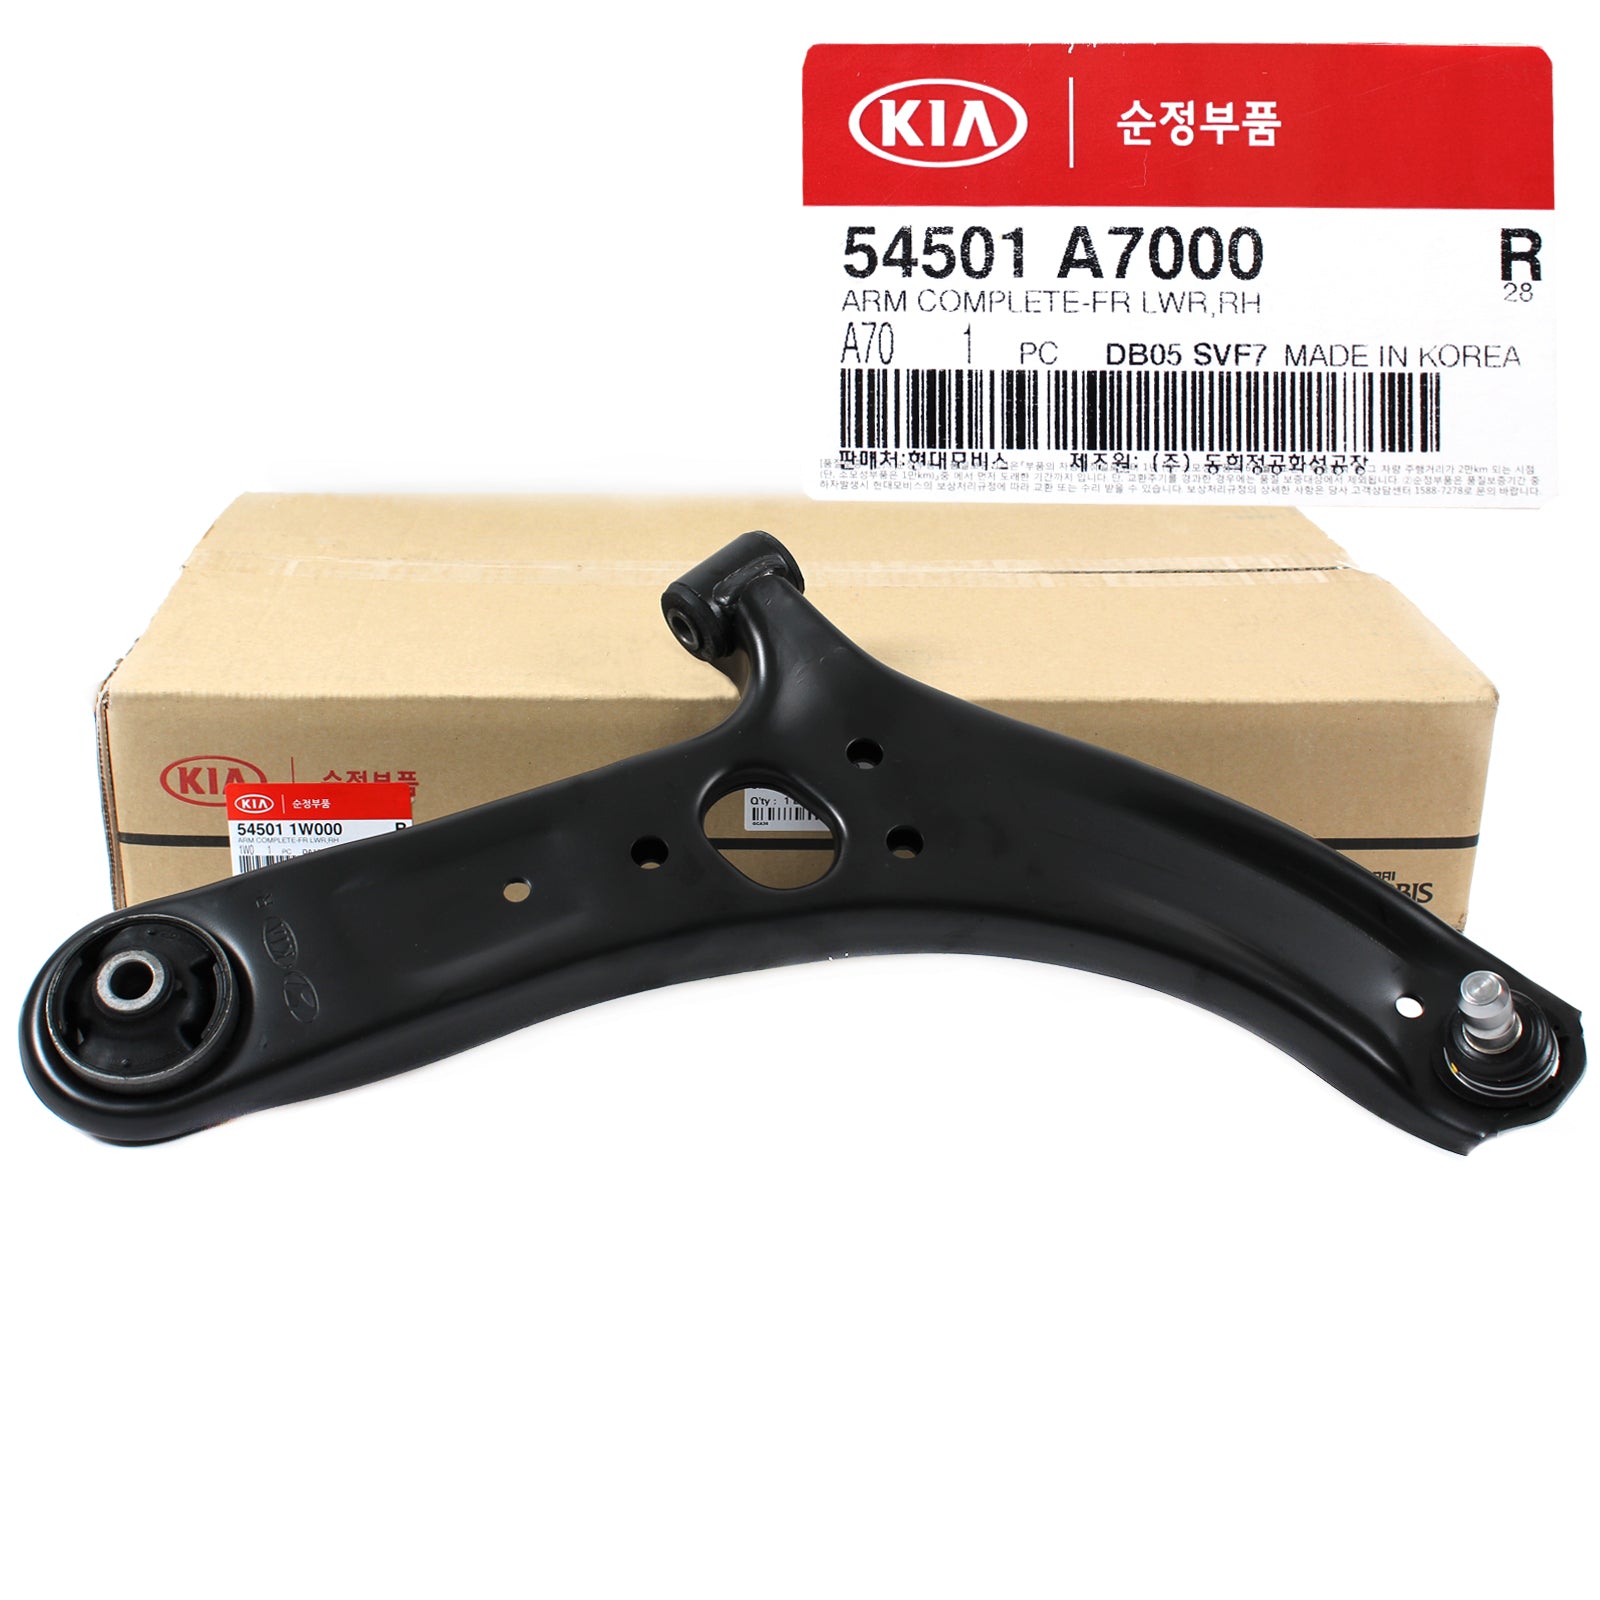 GENUINE Control Arm FRONT LOWER RIGHT for 14-17 Kia Forte & Koup OEM 54501A7000